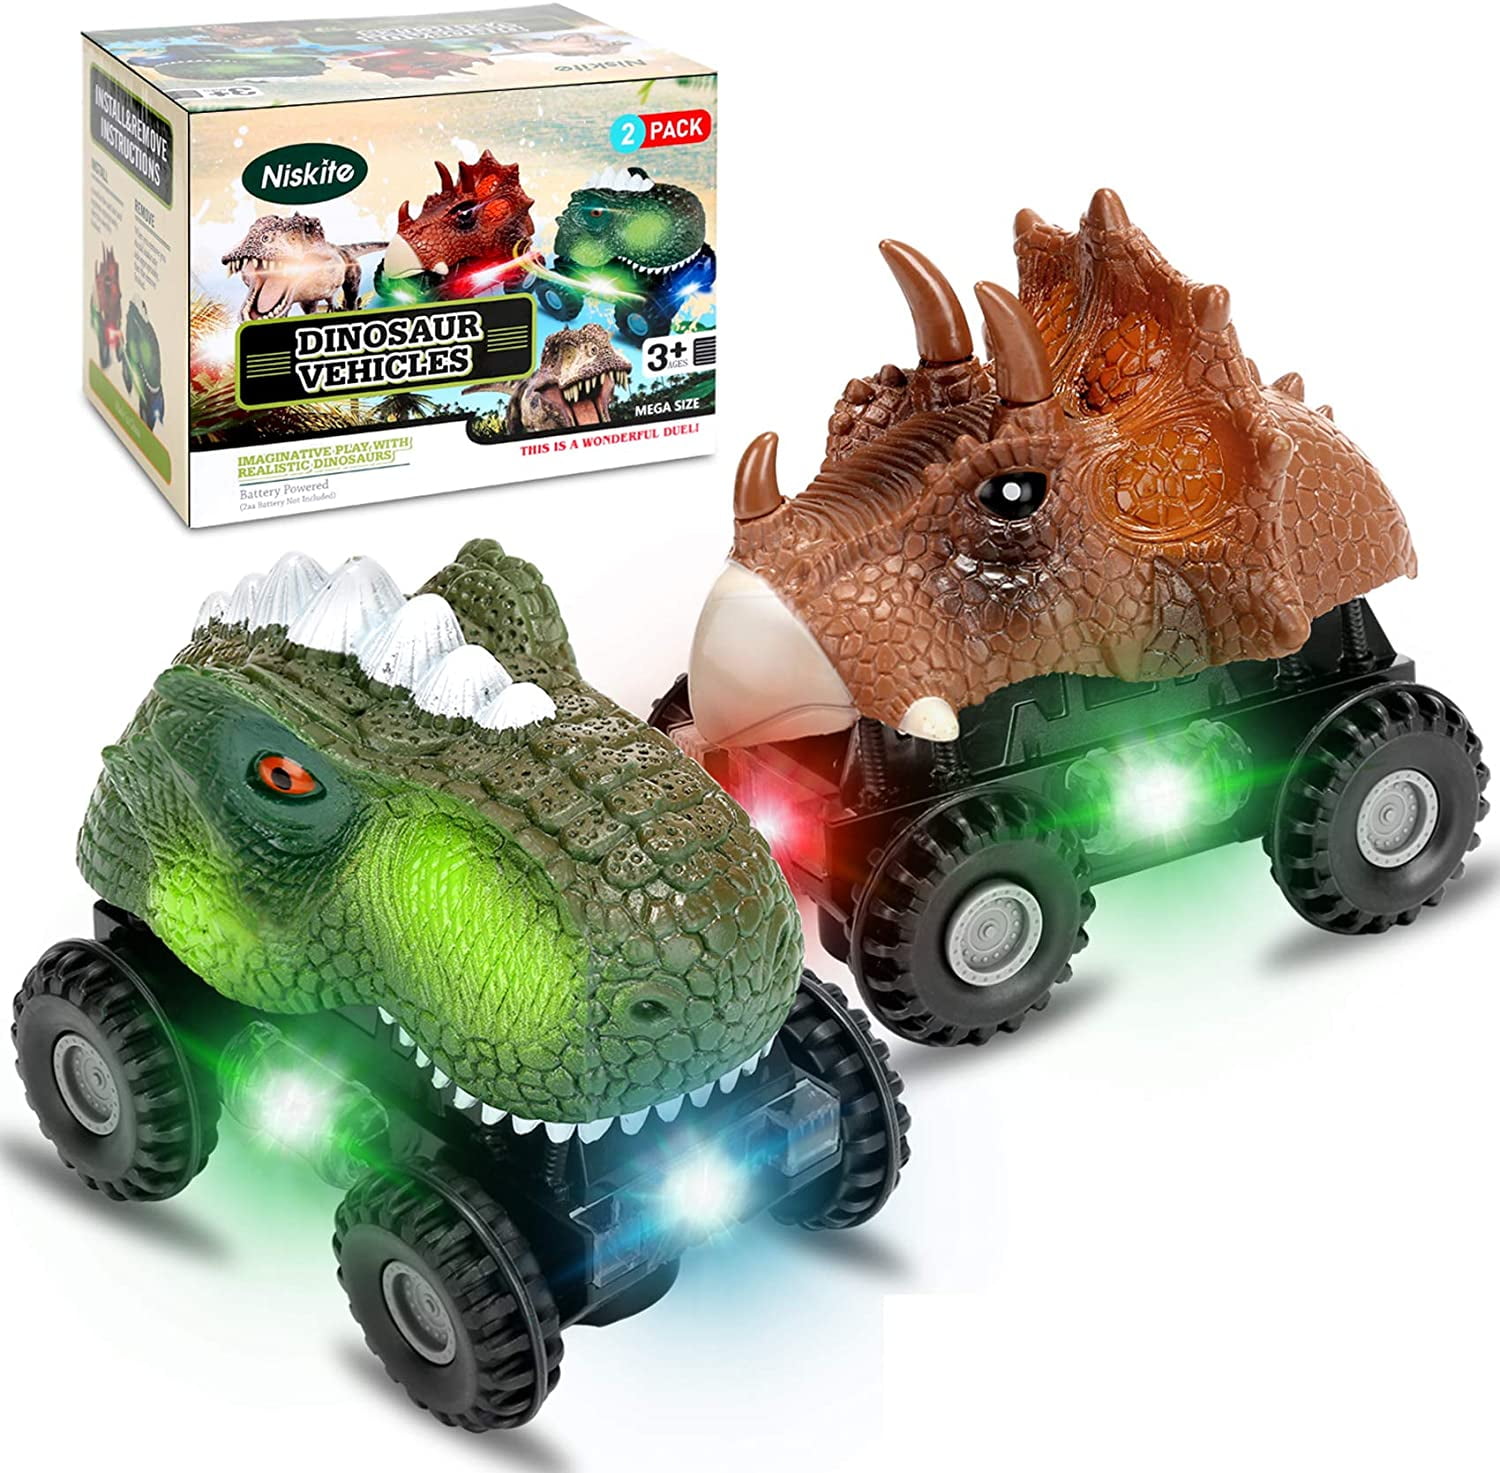 Fun Christmas Gifts Toy Pull Back Vehicles Toys Mini Dinosaur Cars For Boys Gift 